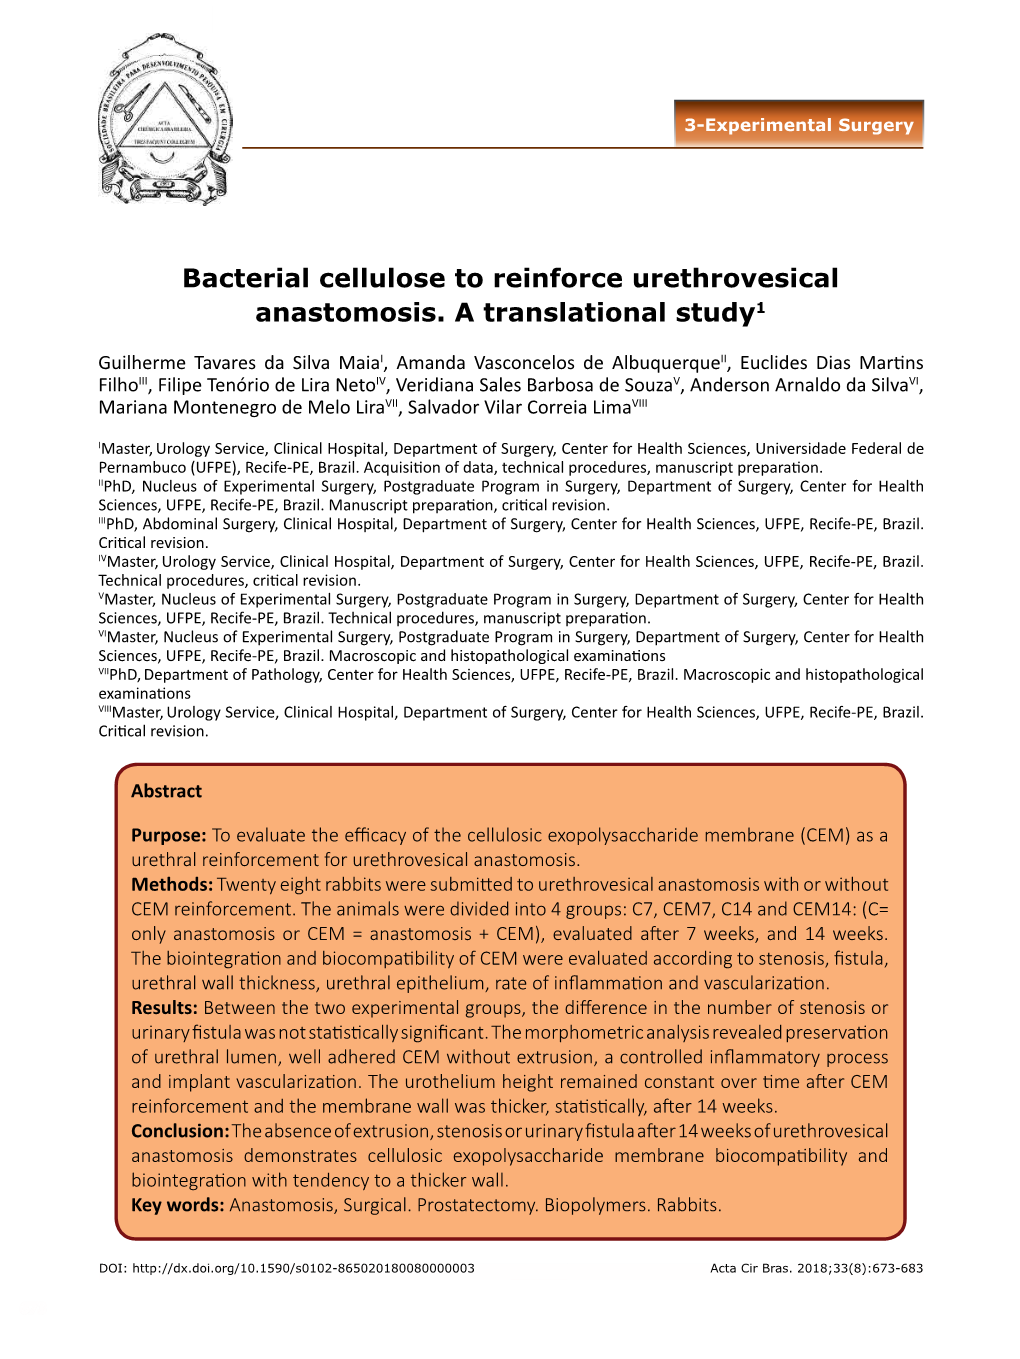 Bacterial Cellulose to Reinforce Urethrovesical Anastomosis. a Translational Study1